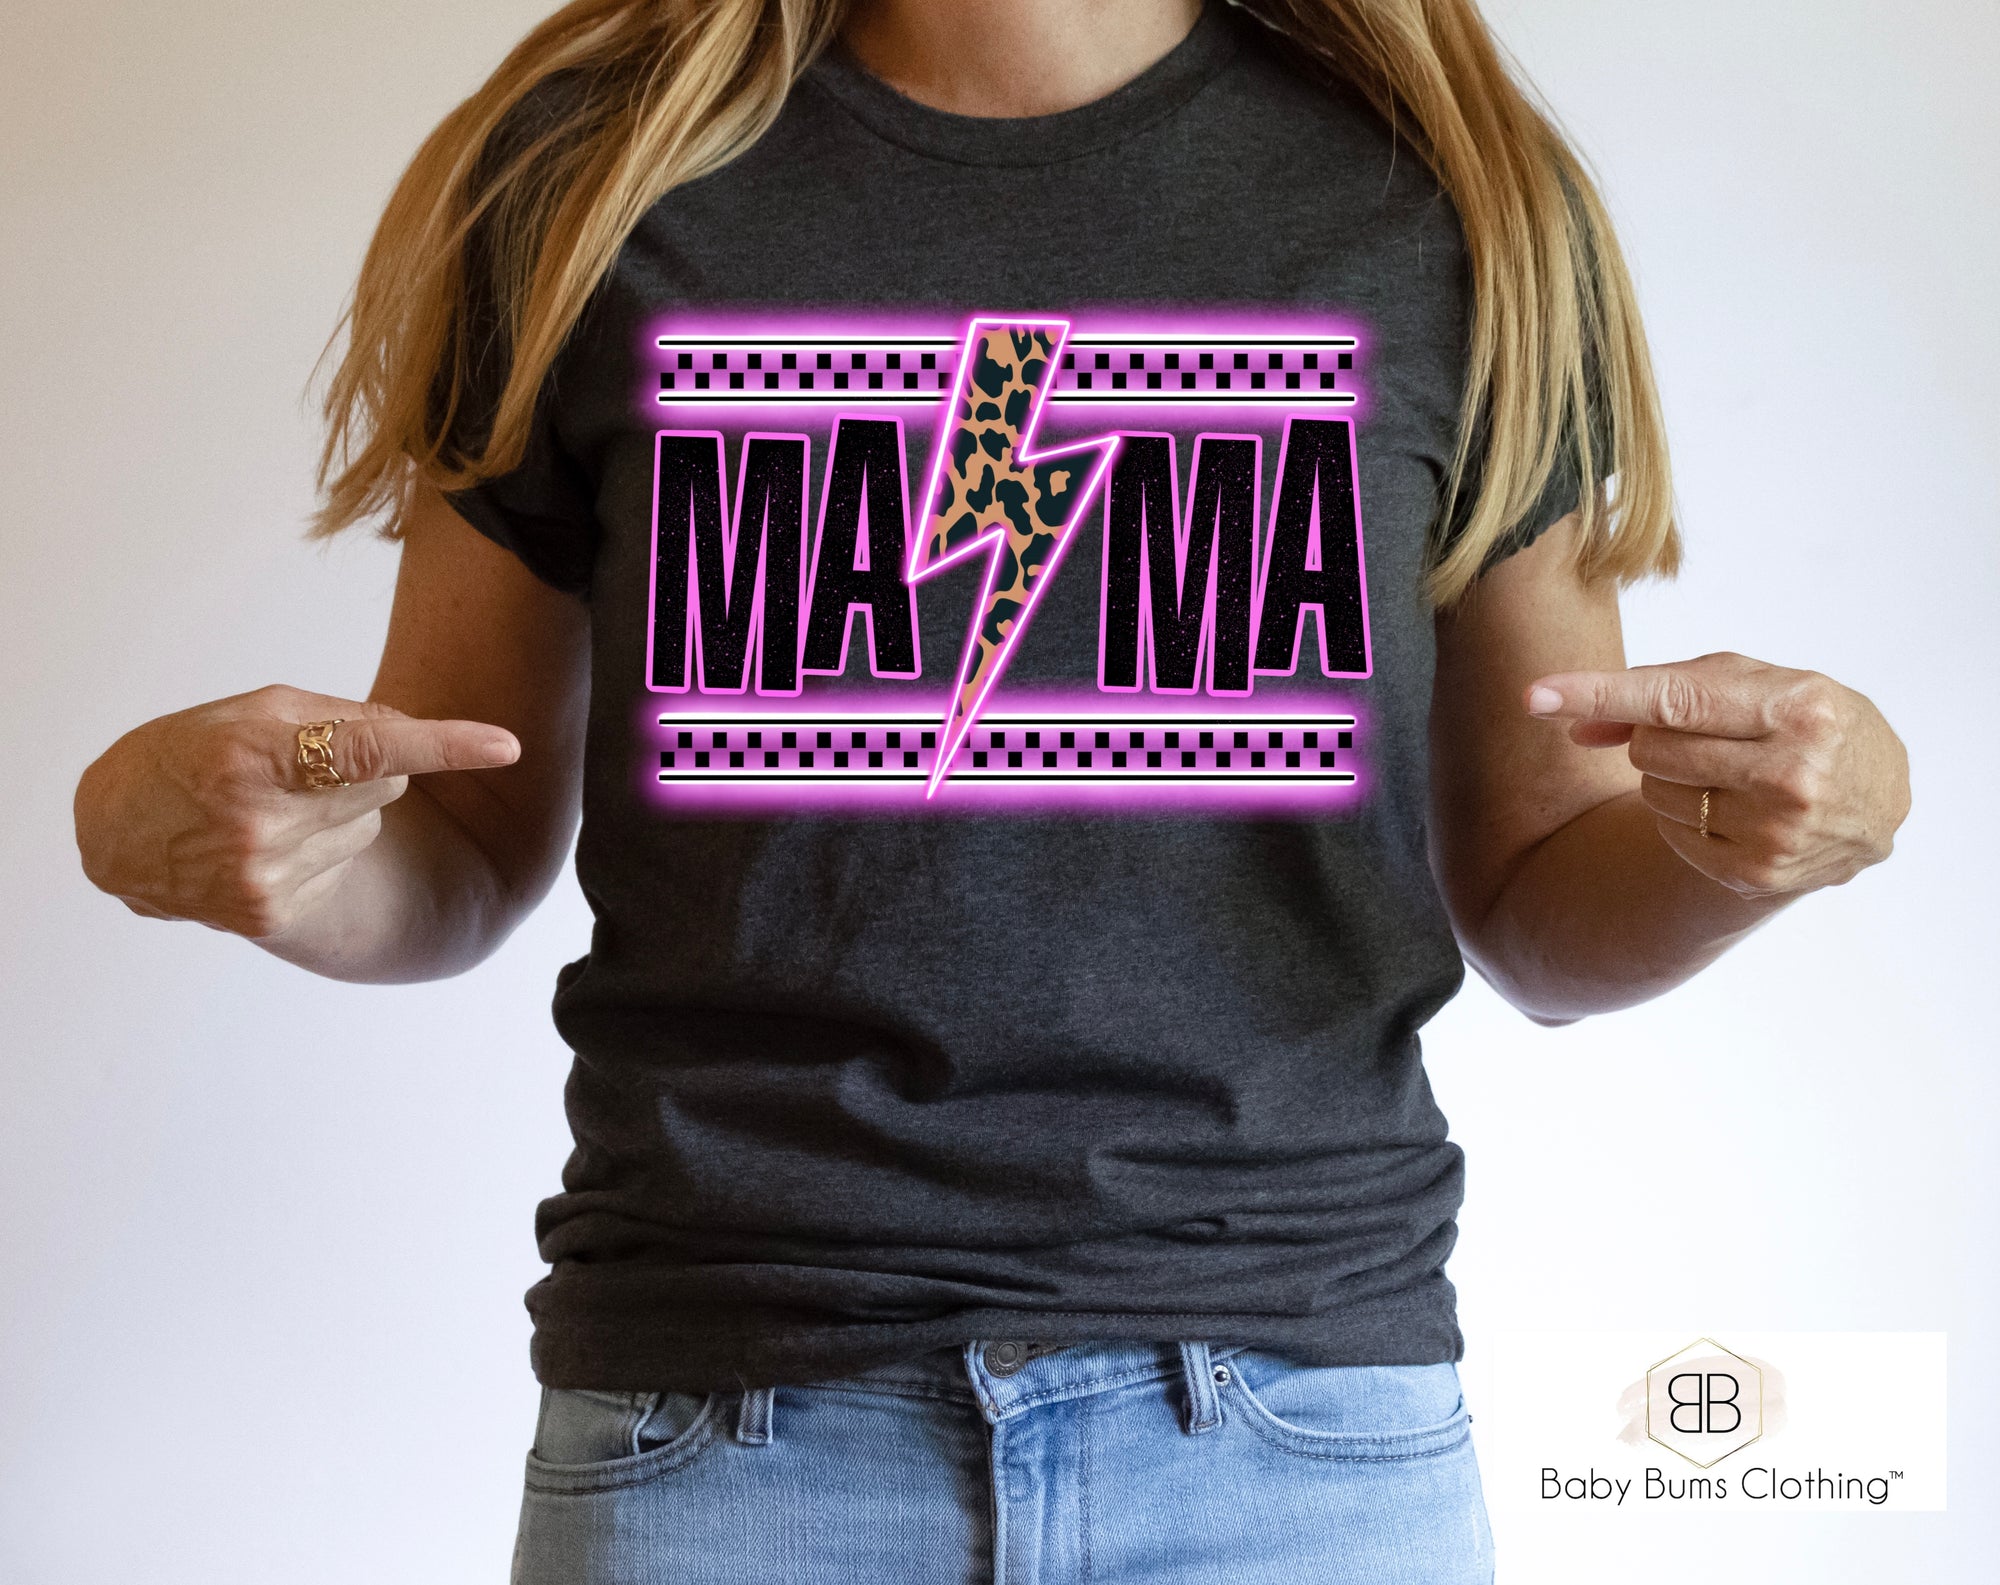 NEON MAMA ADULT UNISEX T-SHIRT - Baby Bums Clothing 